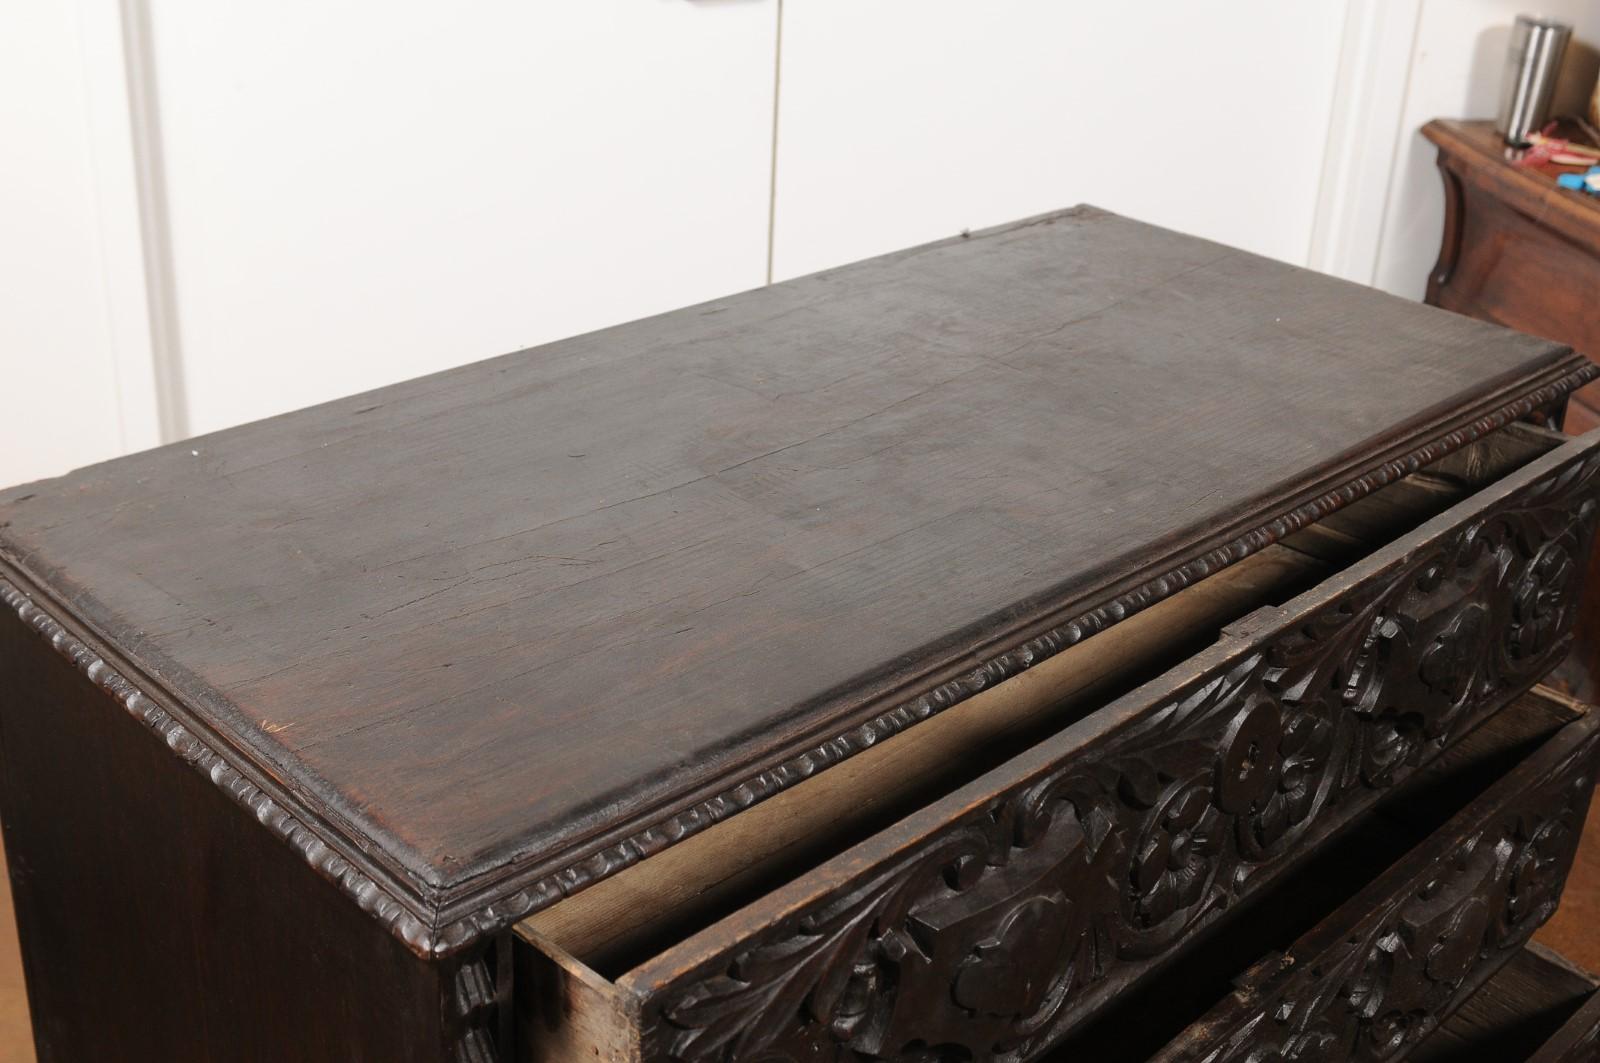 19th Century Italian 1860s Three-Drawer Commode with Hand-Carved Scrollwork and Dark Patina